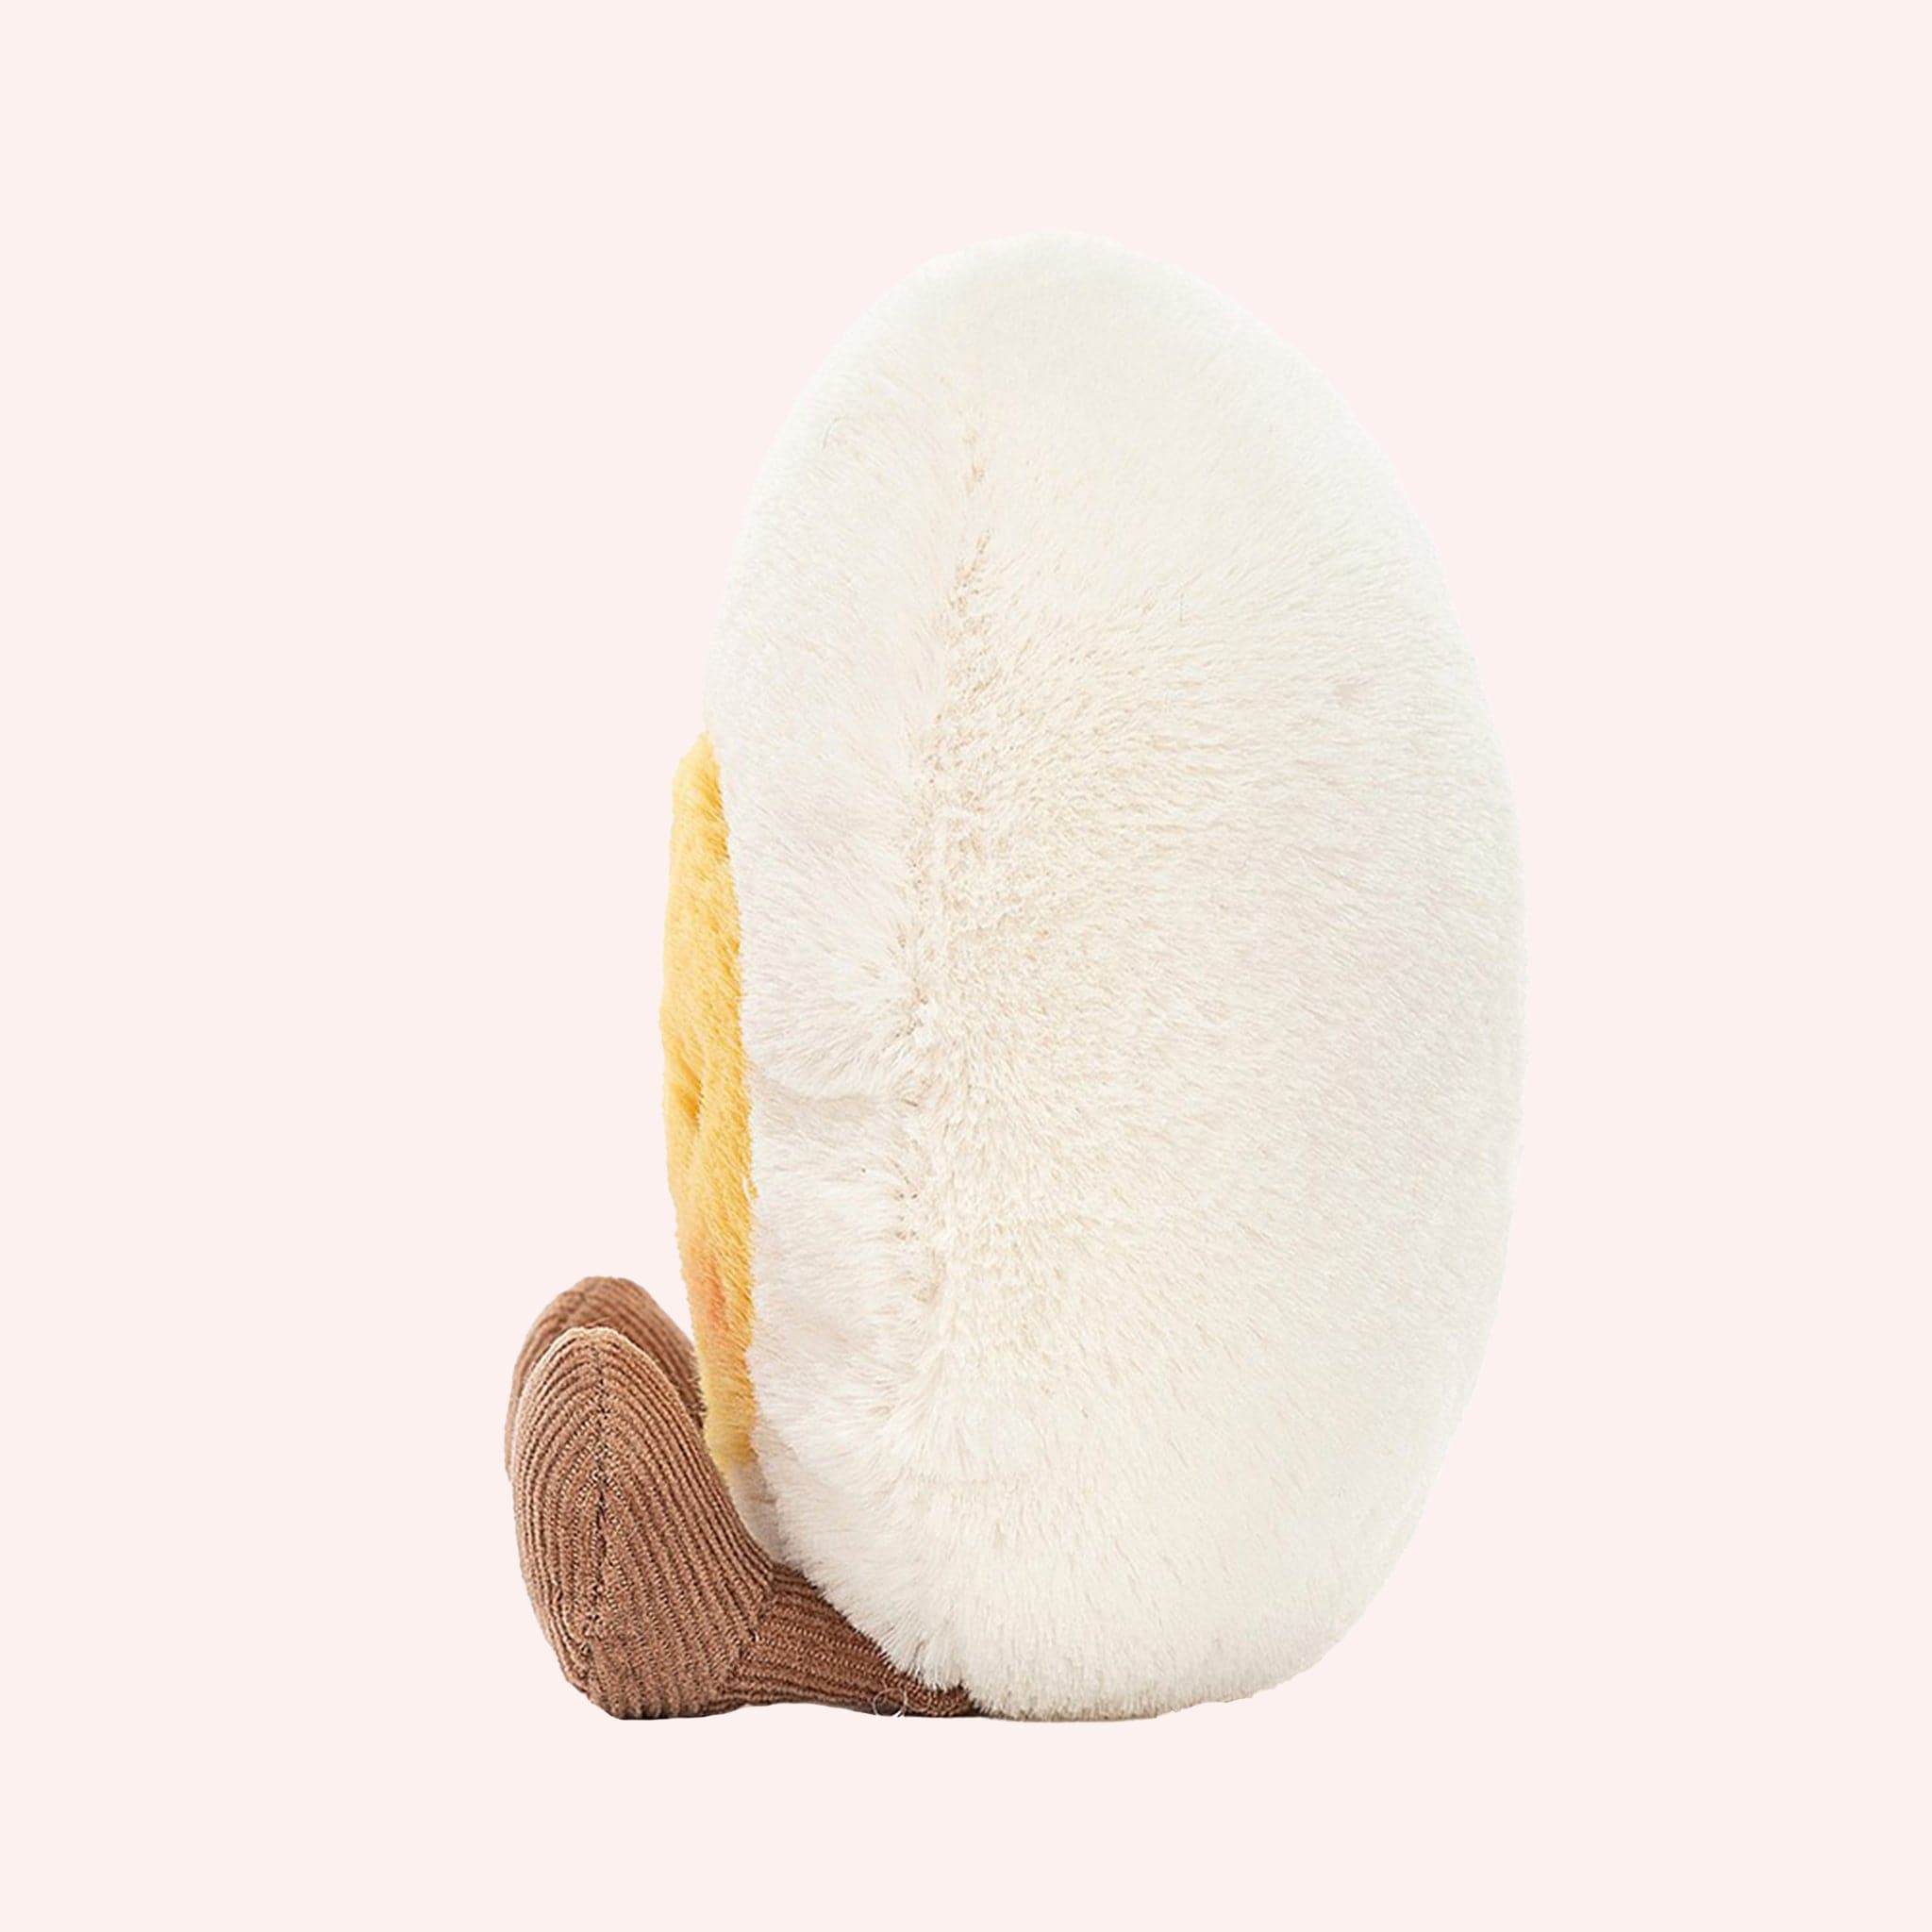 Side view of A soft stuffed animal in the shape of an egg with yellow yoke face and blushing smiley face, and brown floppy legs.